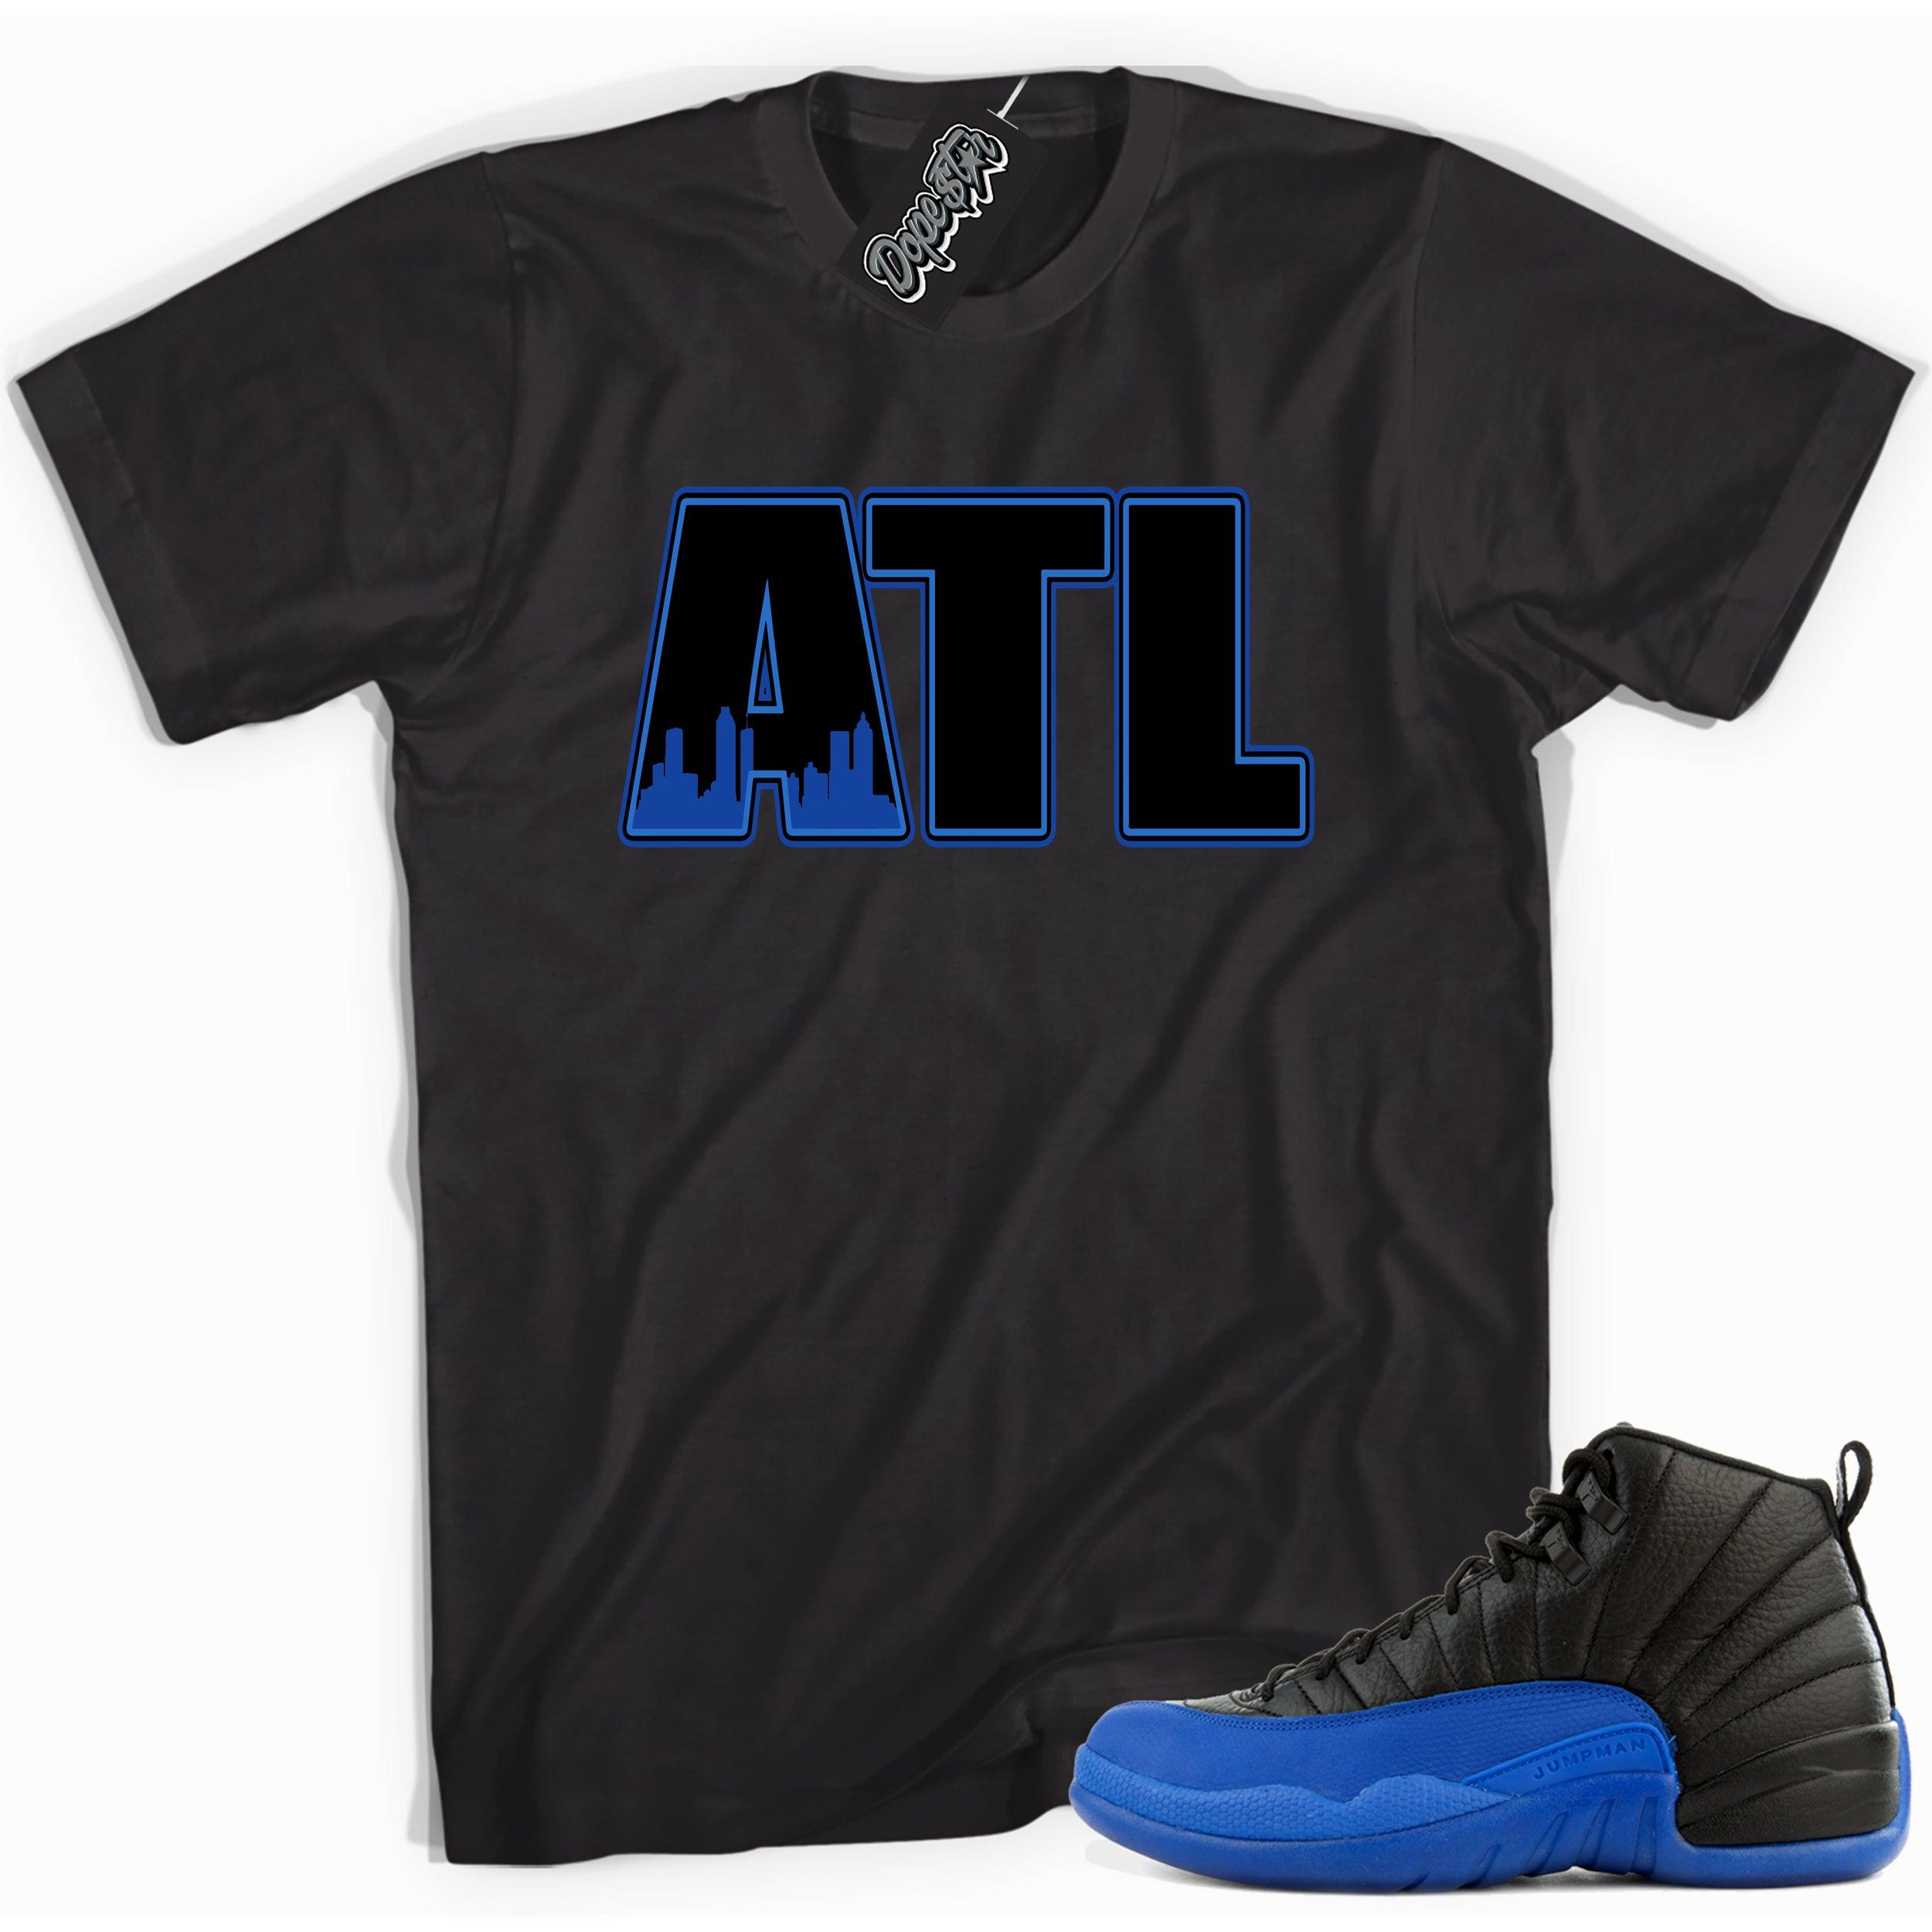 Cool black graphic tee with 'ATL' print, that perfectly matches  Air Jordan 12 Retro Black Game Royal sneakers.